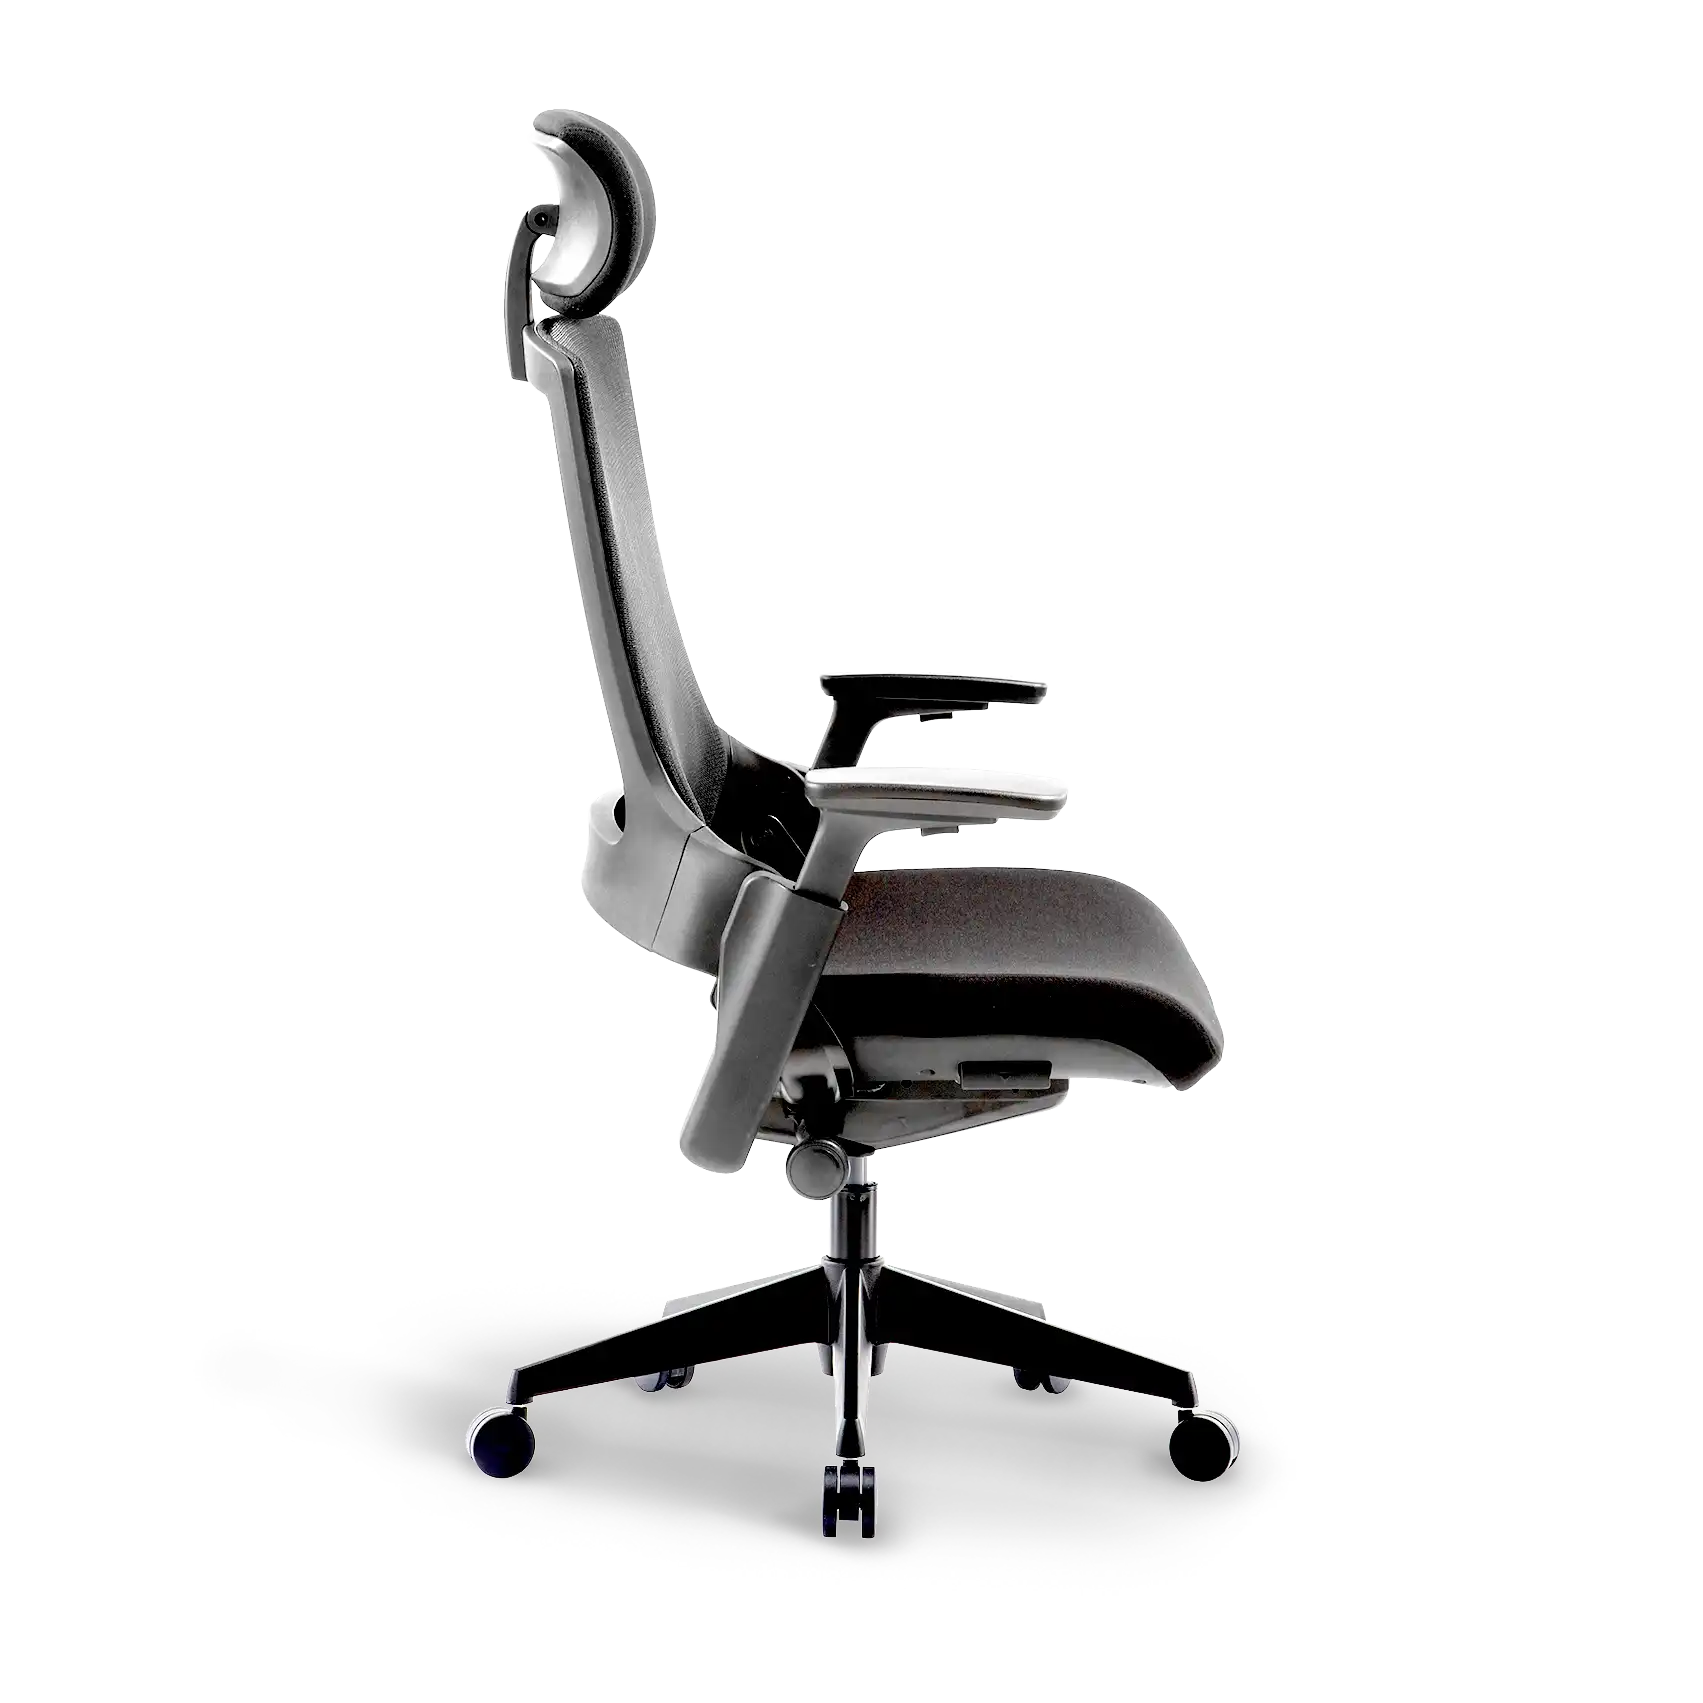 Side view of Flujo Angulo ergonomic office chair with headrest in black